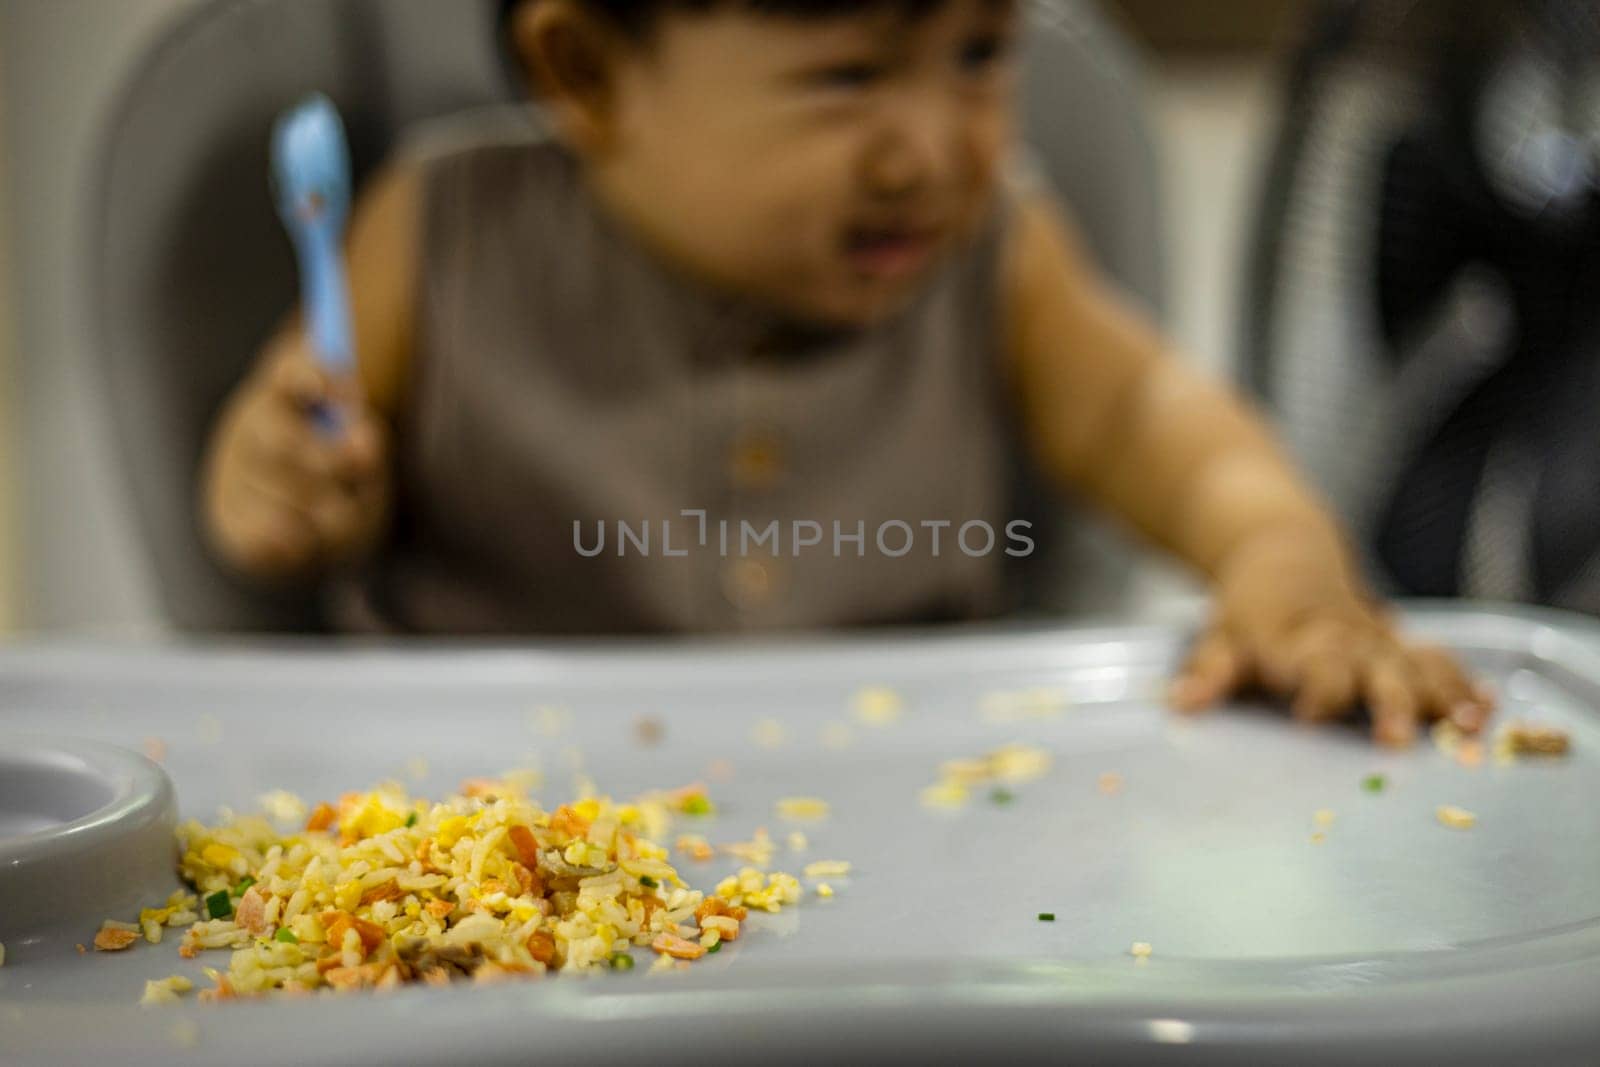 Little boy eating his food and making a mess.